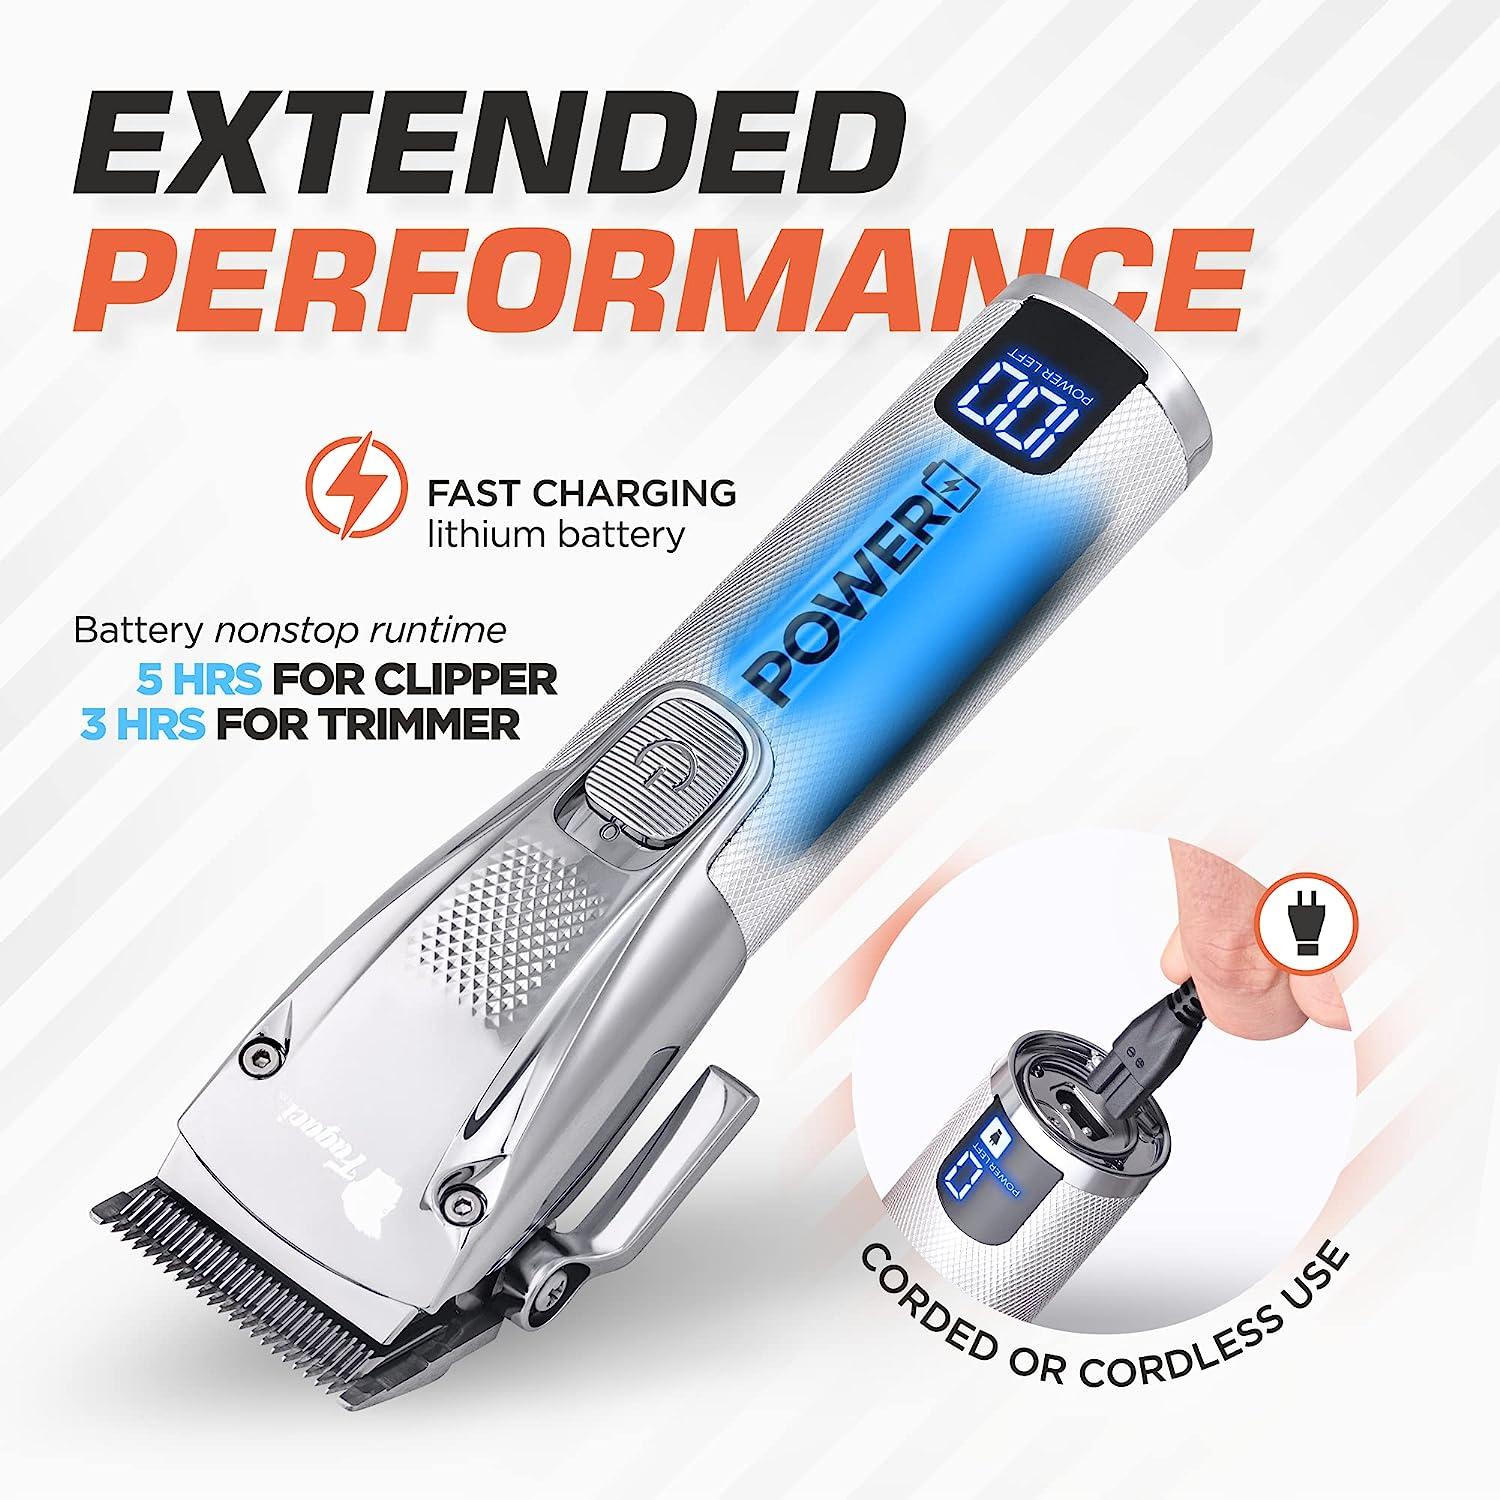 Fagaci Professional Hair Clippers for Men Set Turbo Power with Precise  Cutting, Barber Clippers for Hair Cutting, Cordless Hair Clippers and  Trimmers Set, Maquina de Cortar Cabello, Haircut Barber Kit | Haarschneider